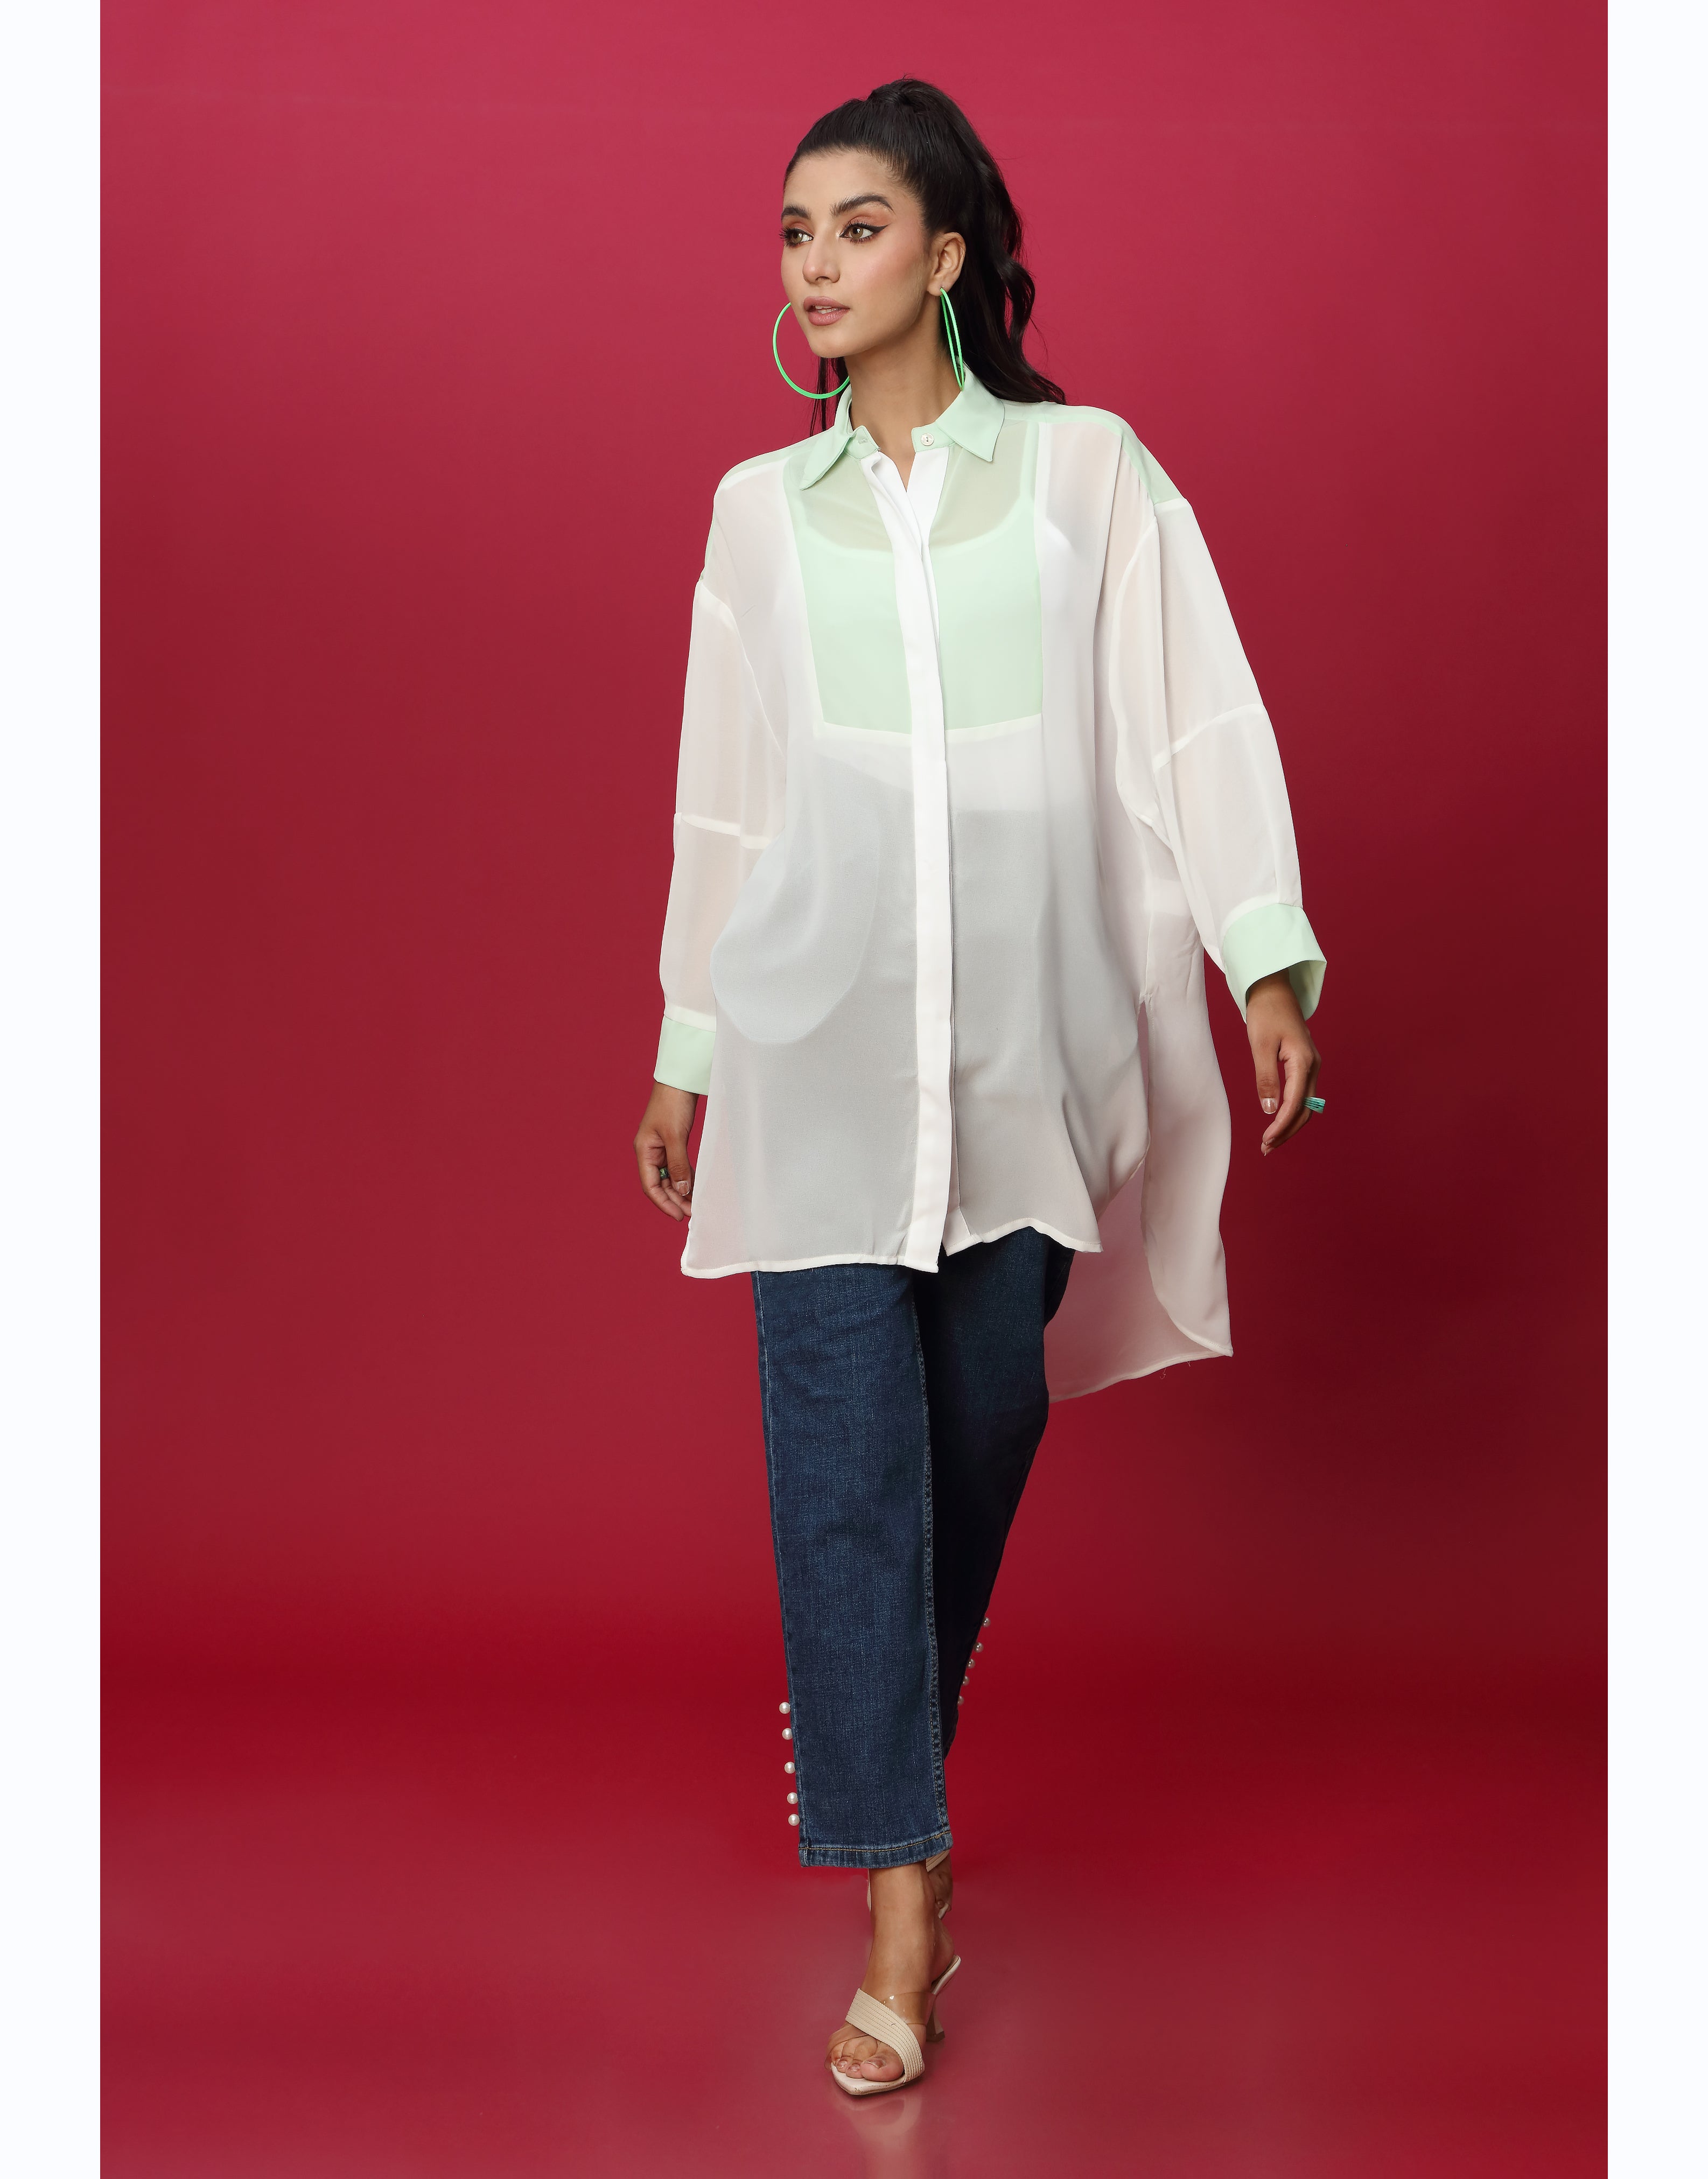 Front Button Closure White Top With Collar Neck